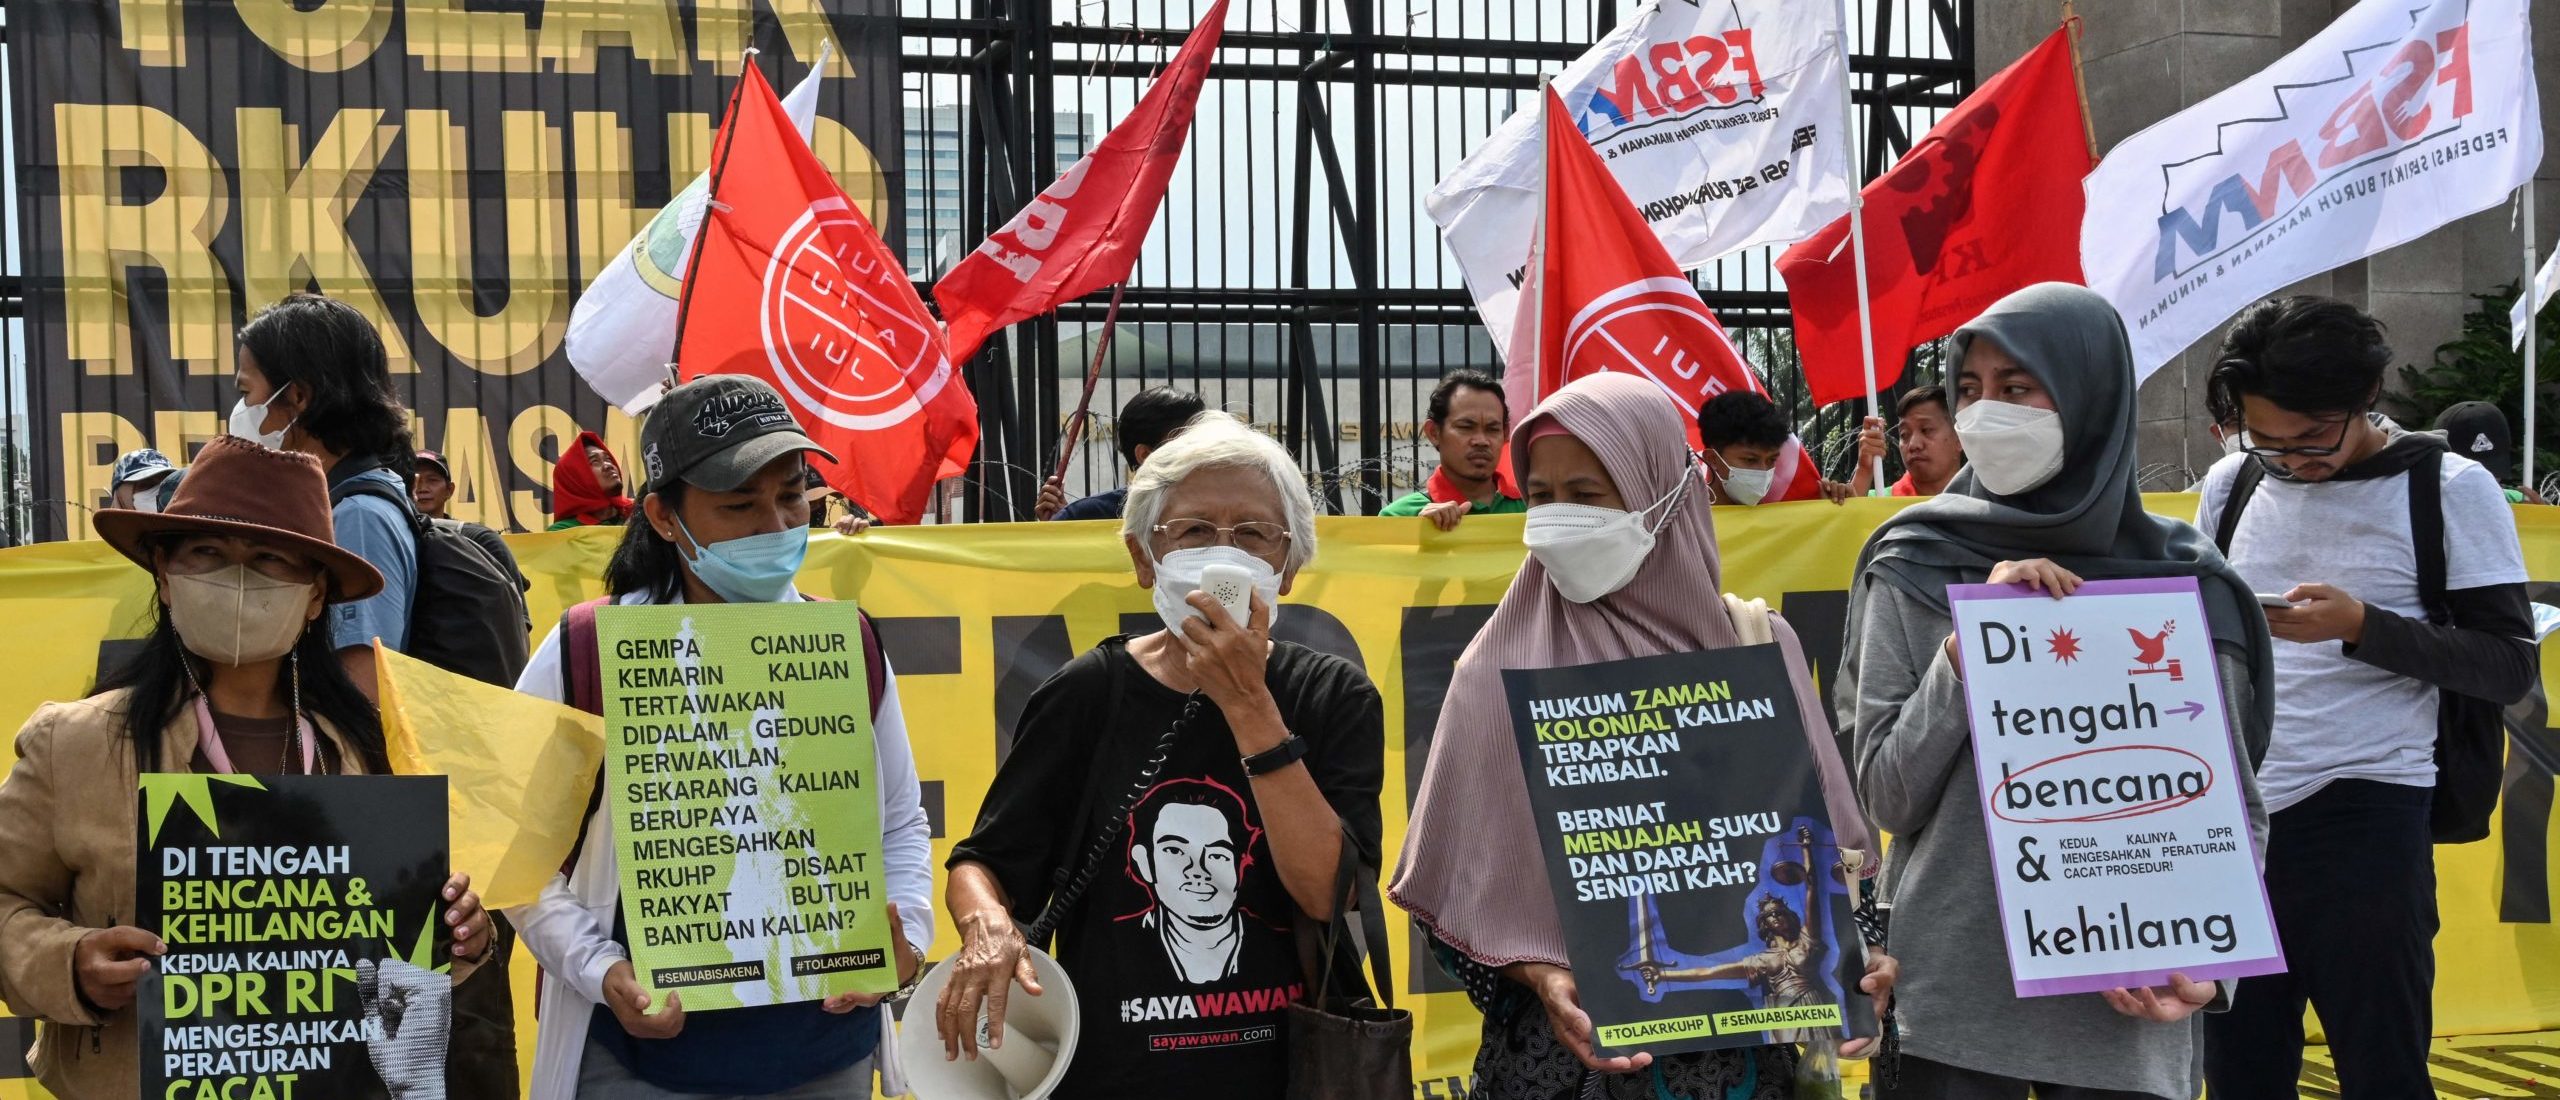 This picture taken on December 5, 2022 shows activists holding a protest against the new criminal code outside the parliament building in Jakarta. - Indonesia's parliament approved on December 6 legislation that would outlaw pre-marital sex while making other sweeping changes to the criminal code -- a move critics deemed as a setback to the country's freedoms. (Photo by ADEK BERRY / AFP) (Photo by ADEK BERRY/AFP via Getty Images)